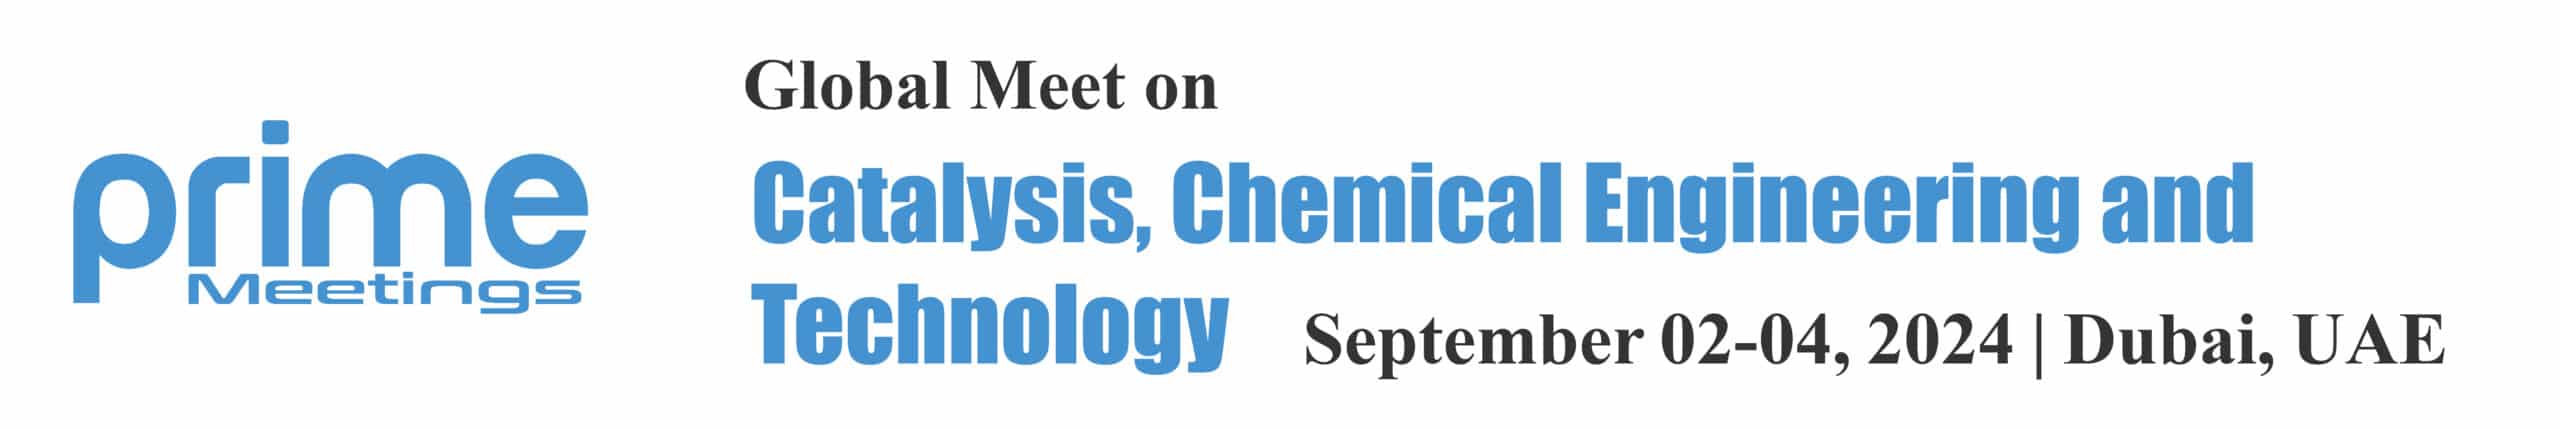 Global Meet on Catalysis, Chemical Engineering and Technology